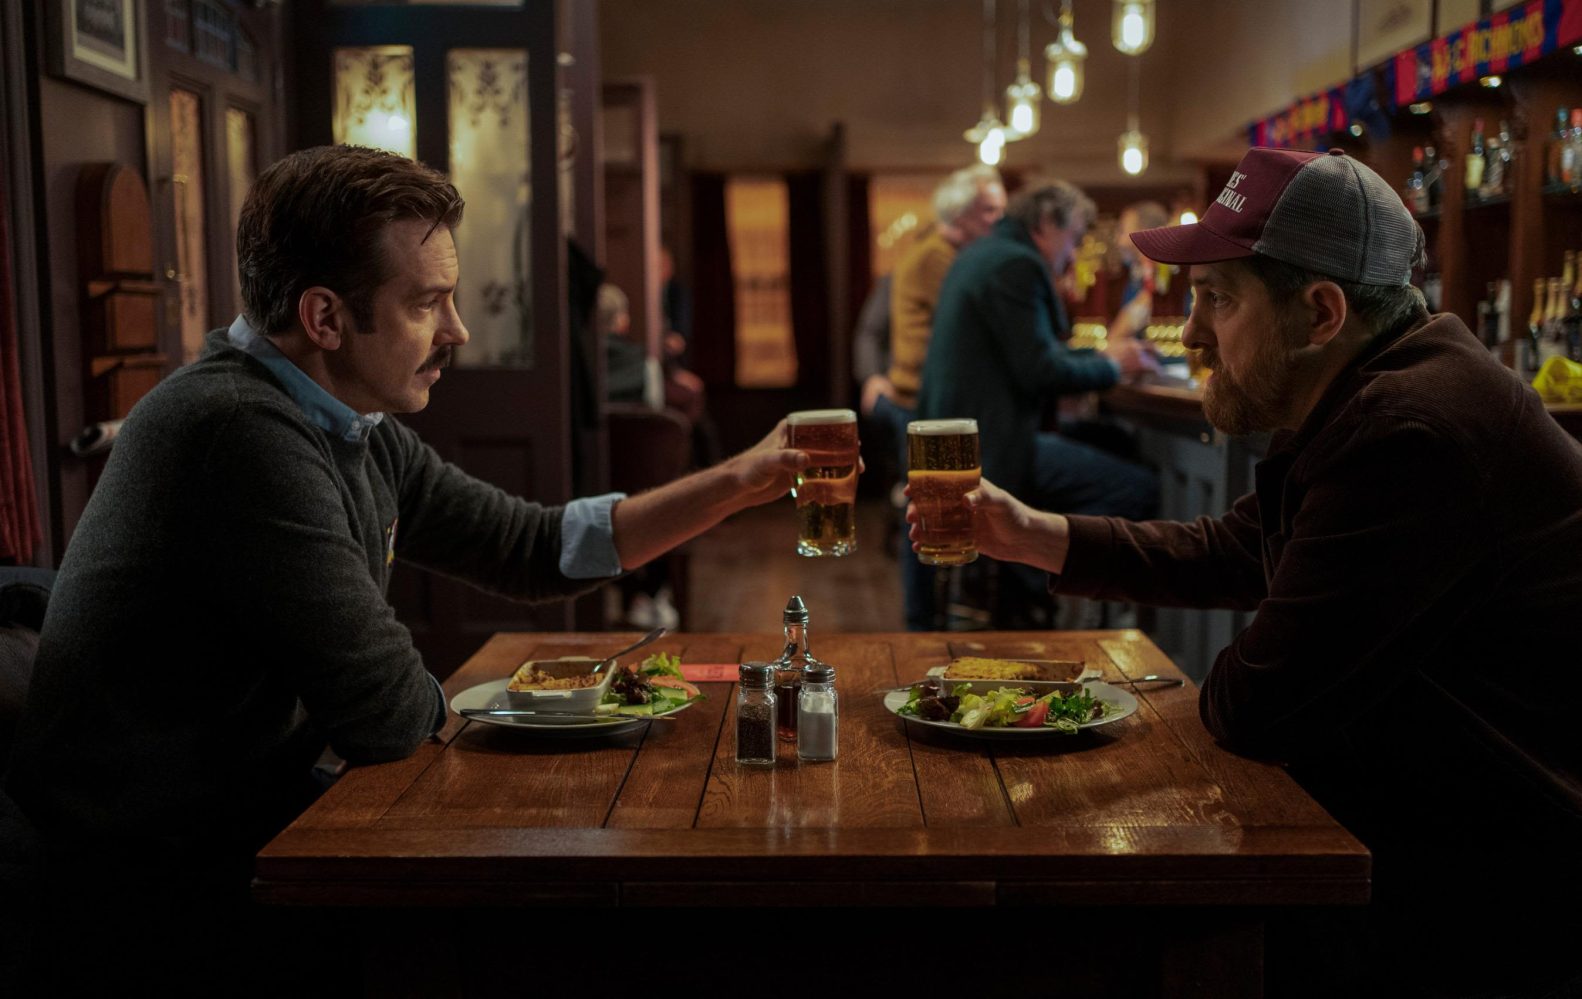 Ted Lasso fans will have a chance to spend the night in the show's iconic pub thanks to Airbnb